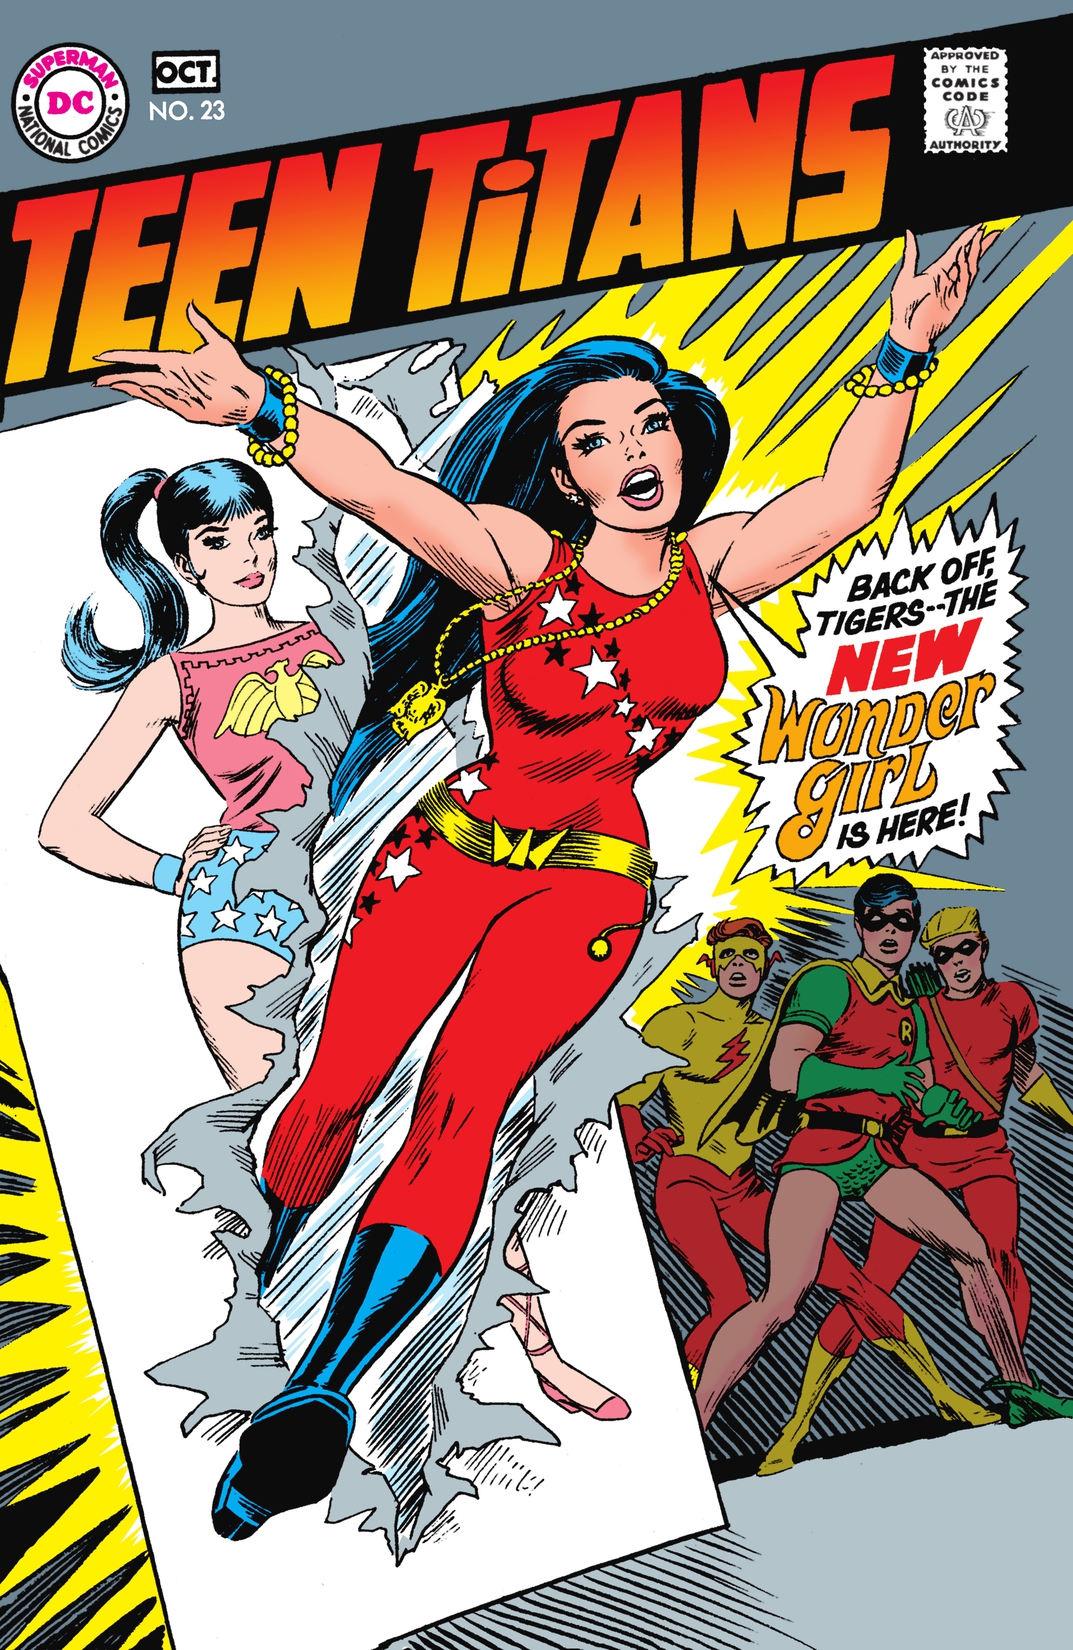 Teen Titans (1966-) #23 preview images